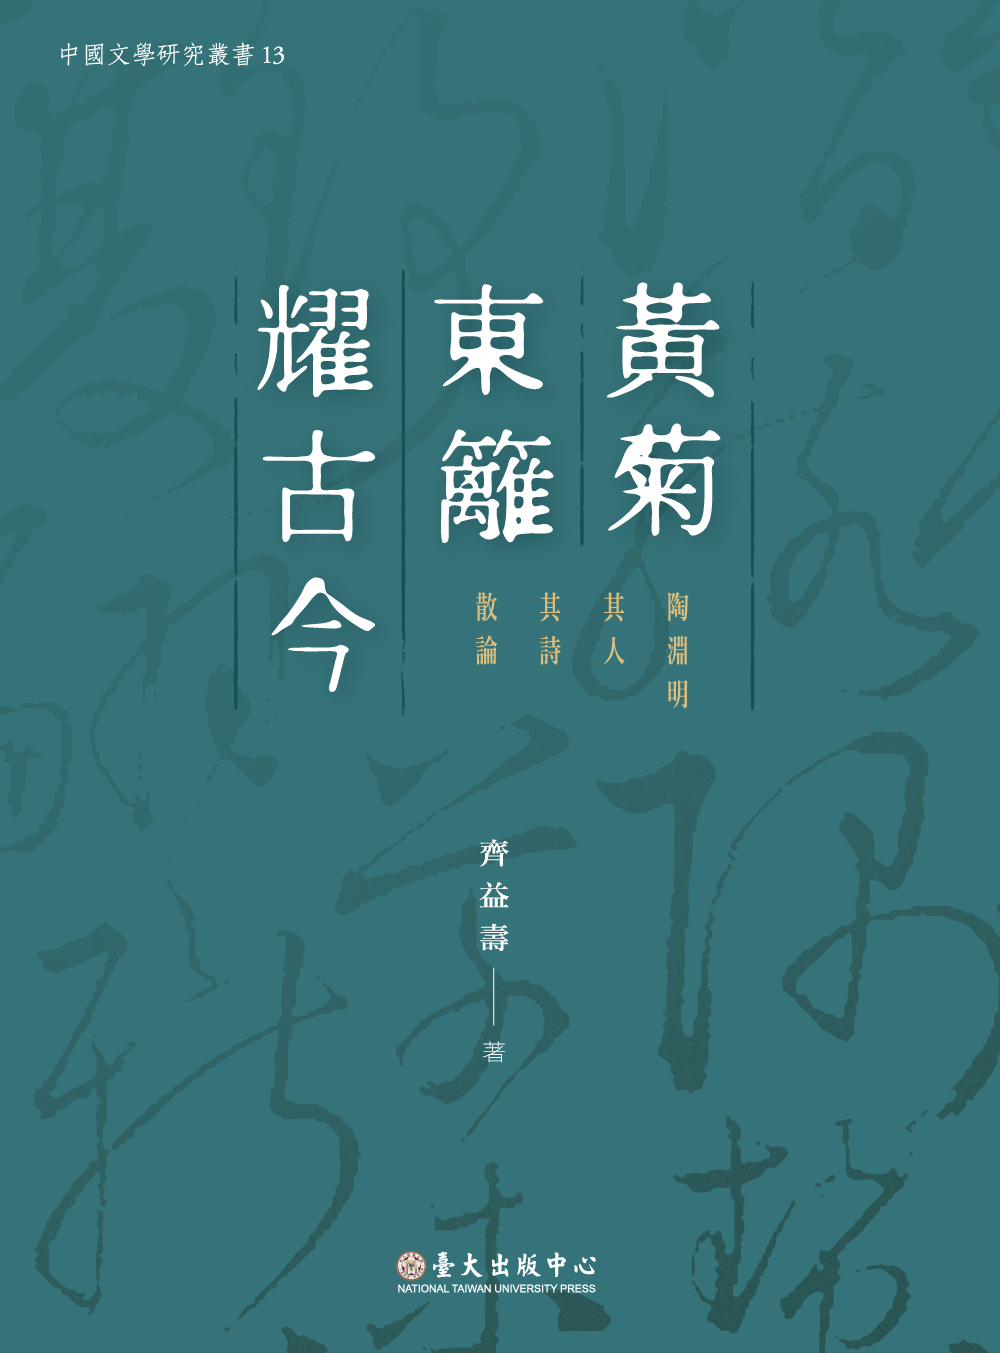 The Eternal Chrysanthemum by the Bamboo Fence: Essays on Tao Yuan-ming and His Poetry